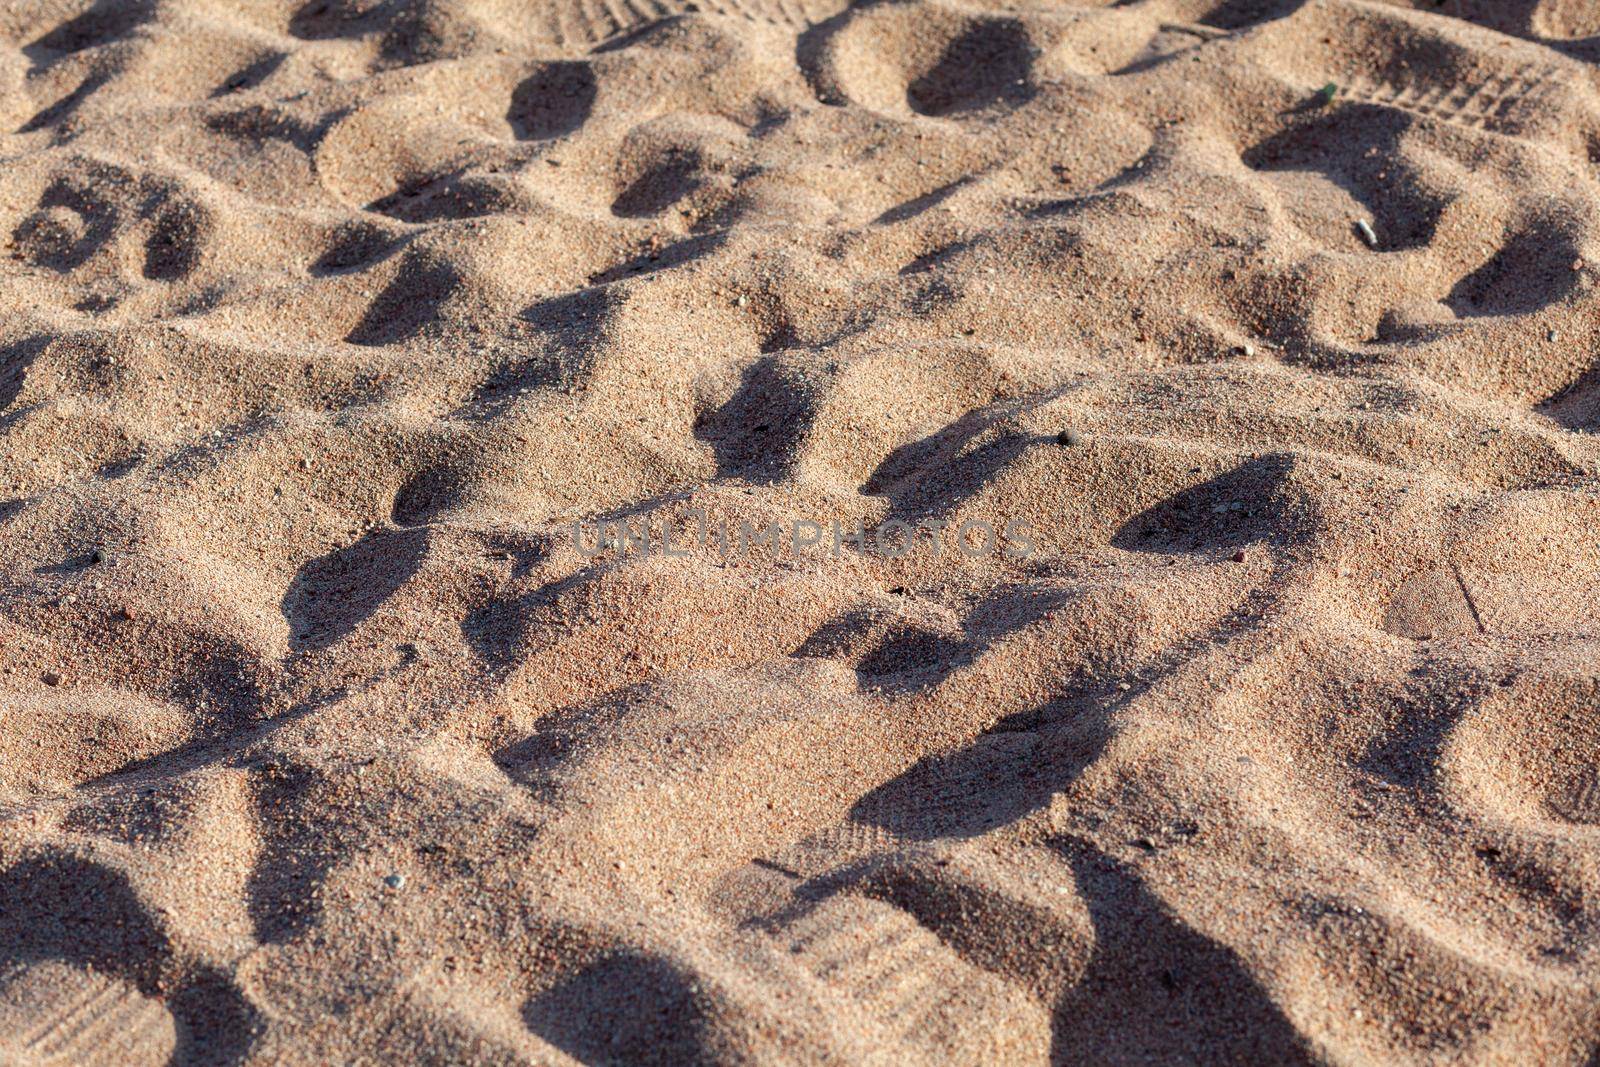 The texture of pure sand on the beach or in the desert. There is free space for the text.